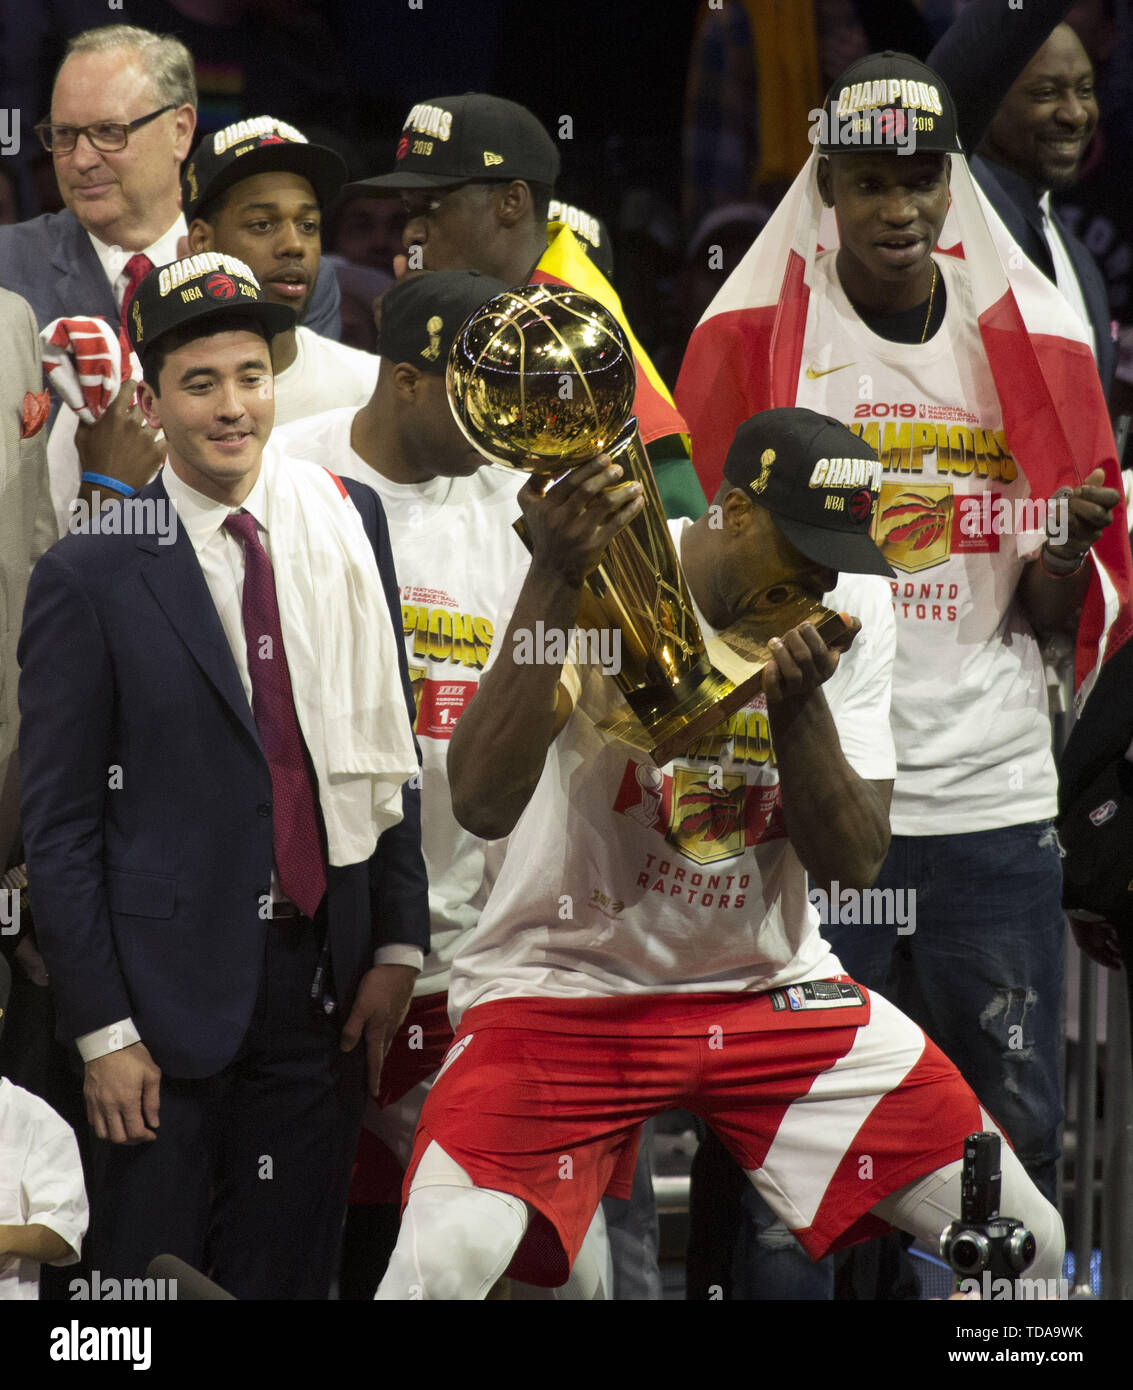 See the Larry O'Brien Trophy at the Toronto Raptors Championship